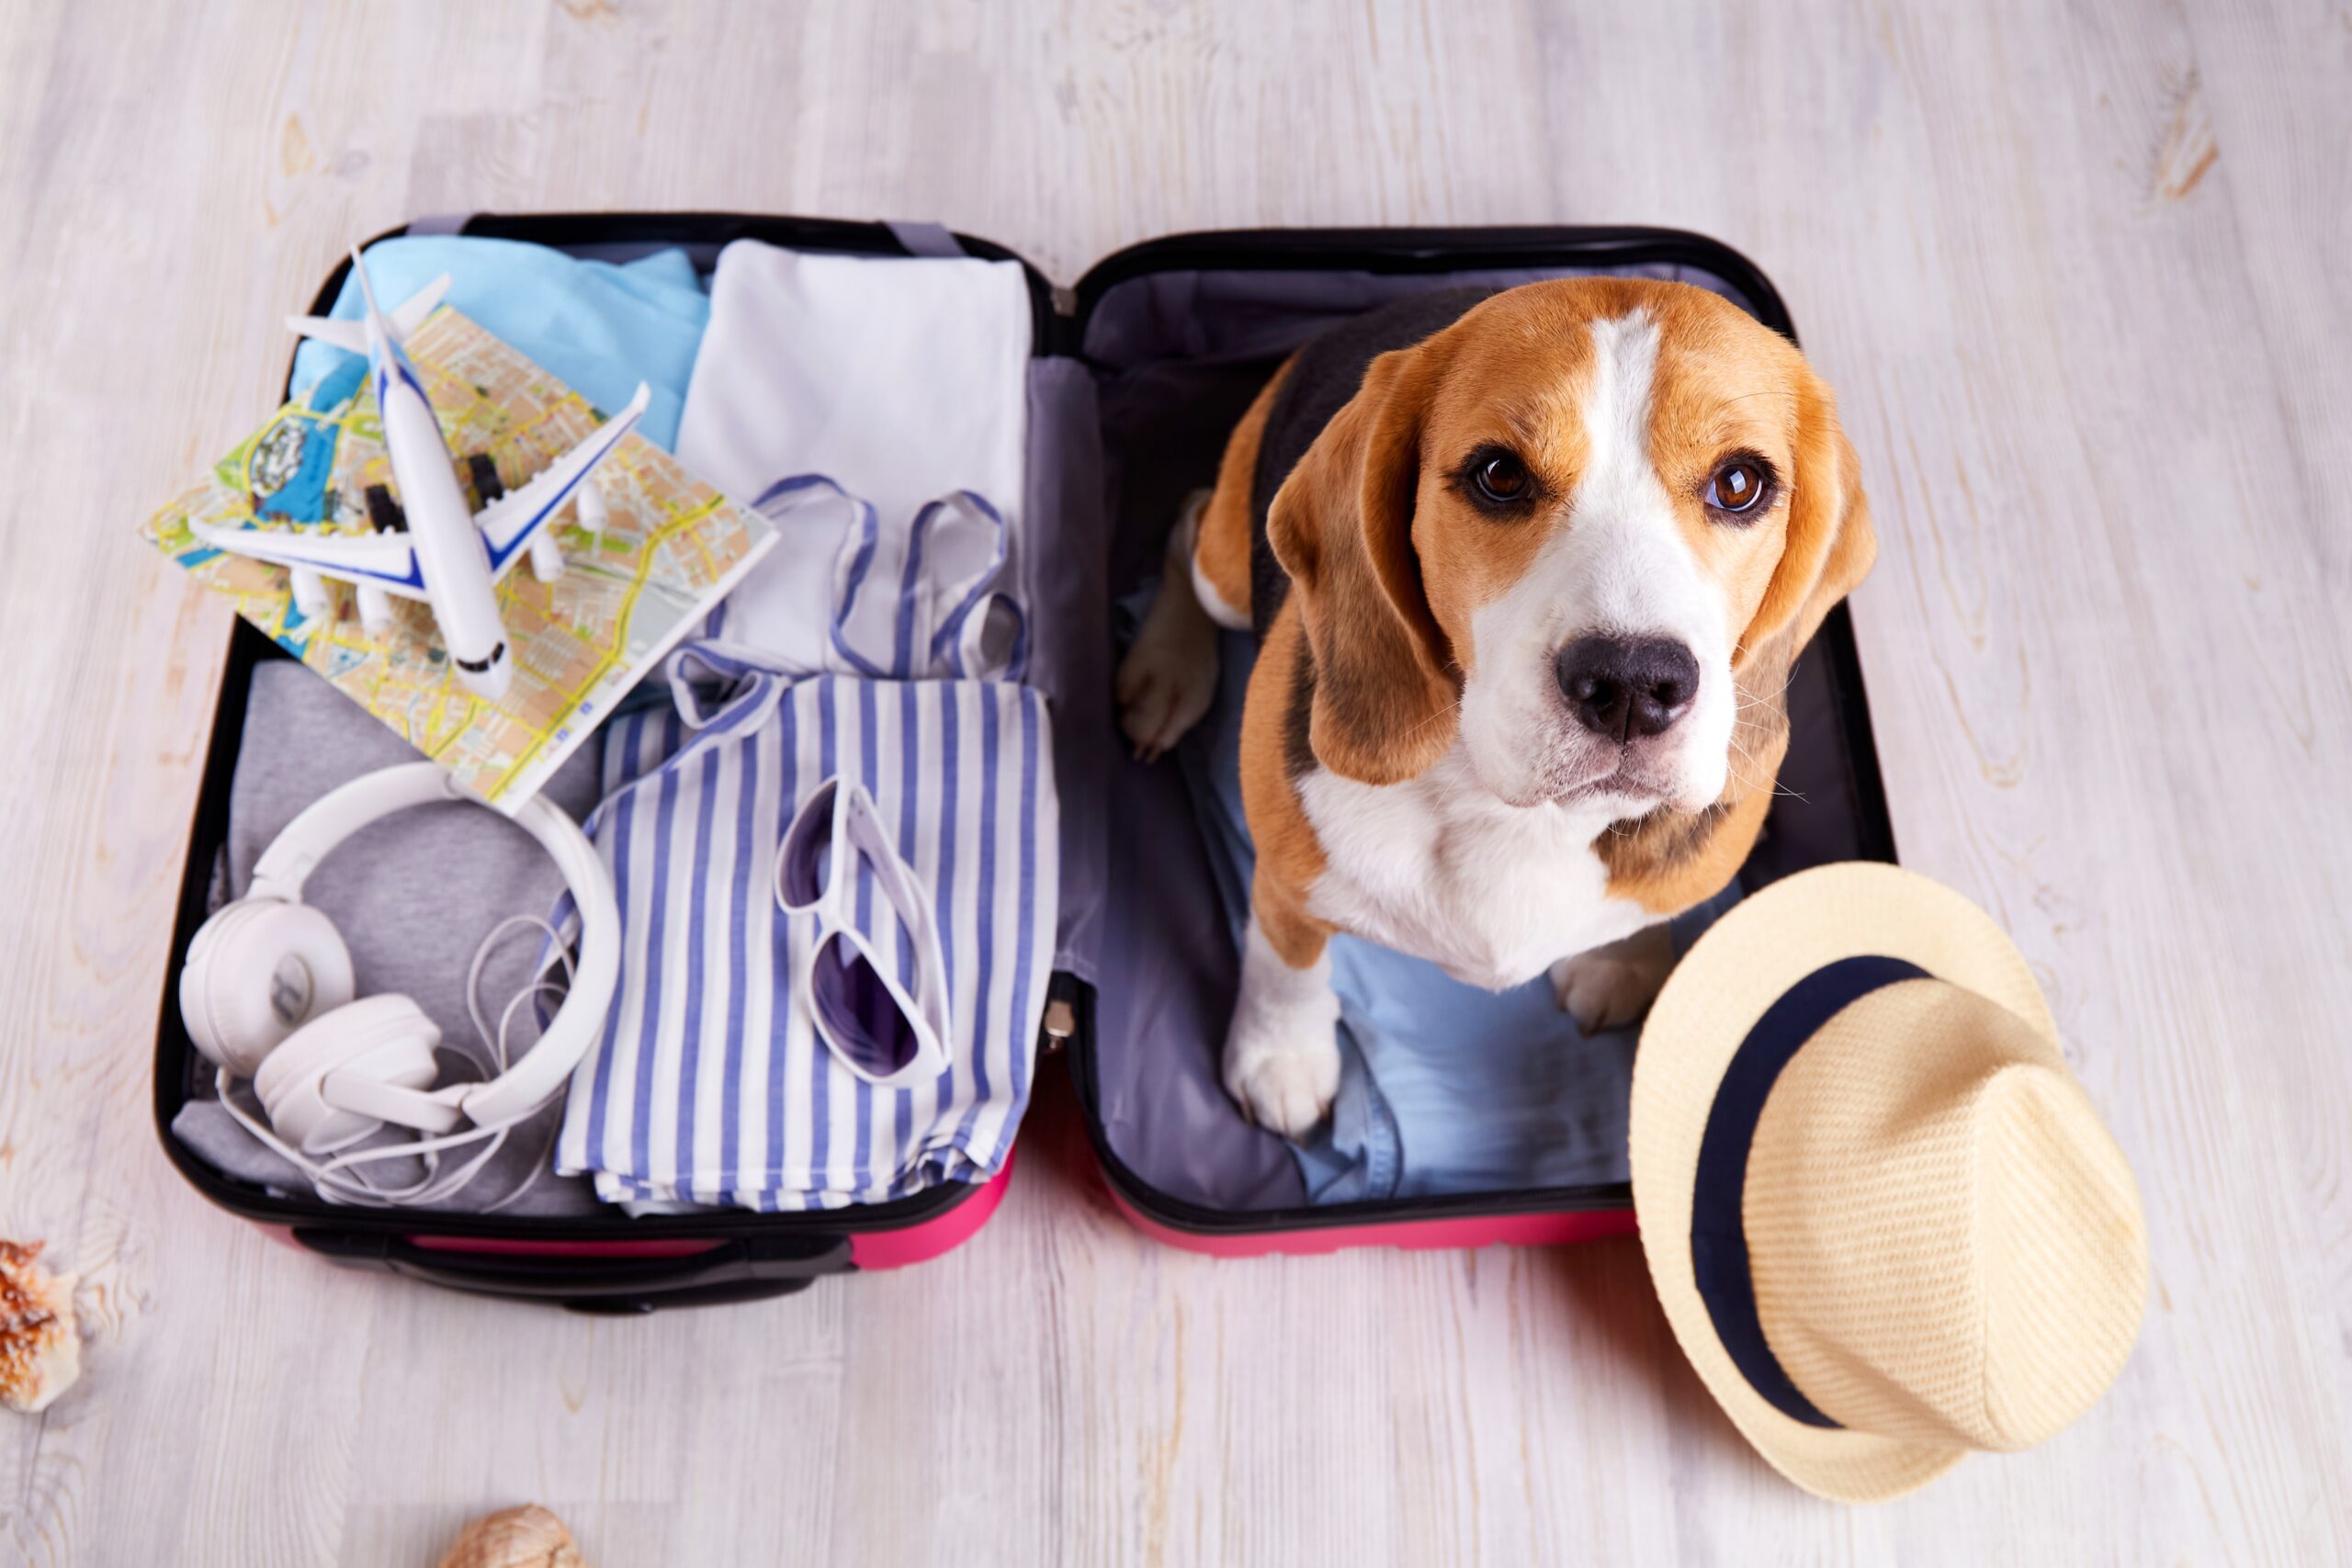 A,Beagle,Dog,Sits,In,An,Open,Suitcase,With,Clothes